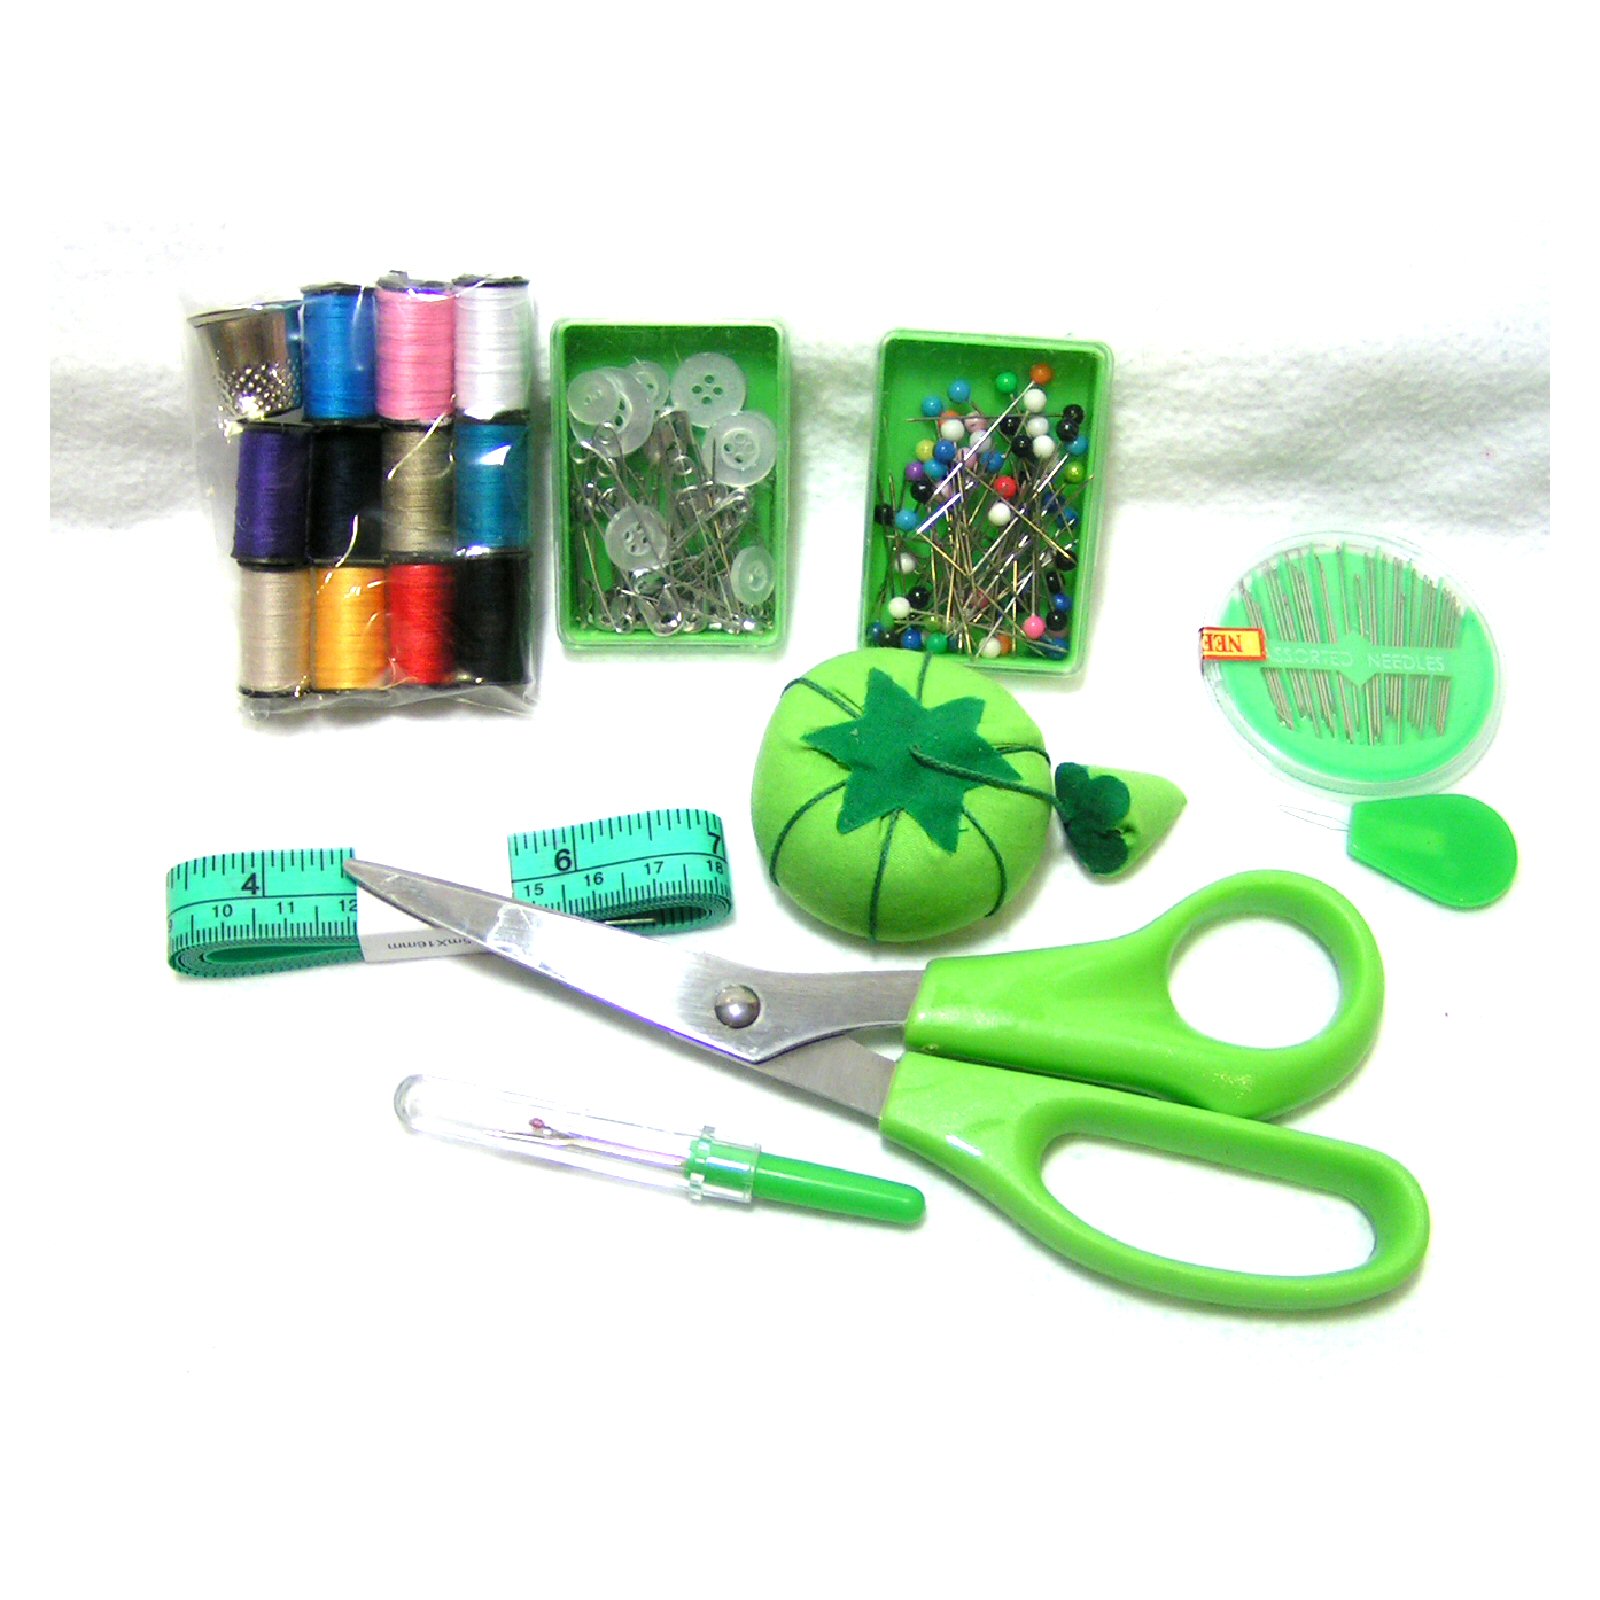 10-pc GREEN Portable Sewing Kit in Pouch for Home & Travel - Click Image to Close